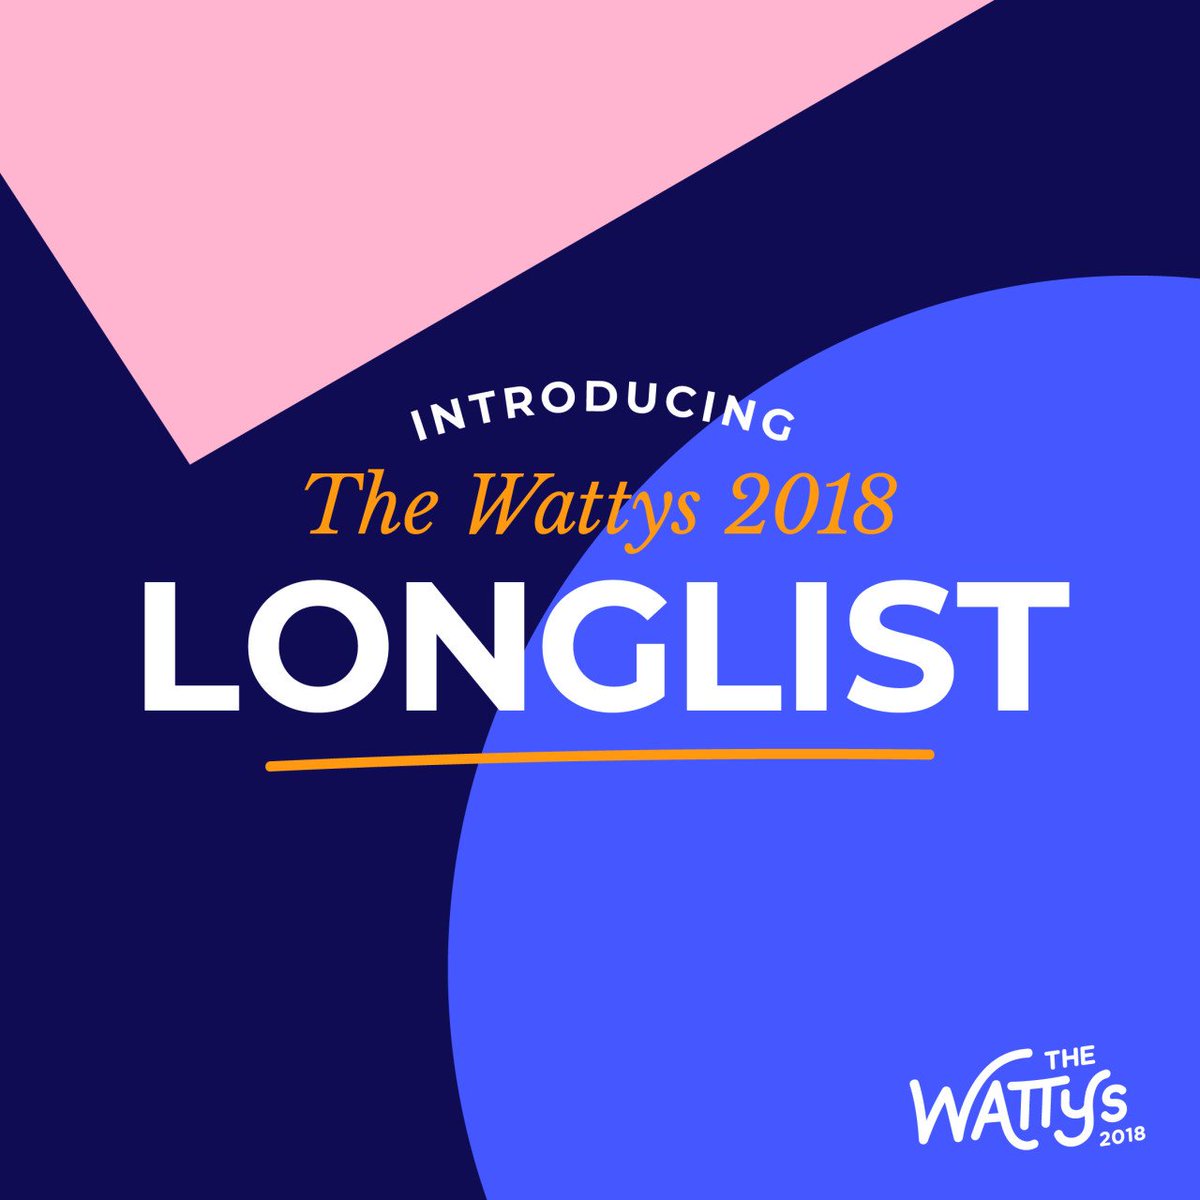 The long-awaited #Wattys2018 Longlist is now LIVE! Visit the Wattys profile on Wattpad and show the longlist some love! Congrats to all who made the cut - you're one step closer to a #Watty! w.tt/2I2L7fc